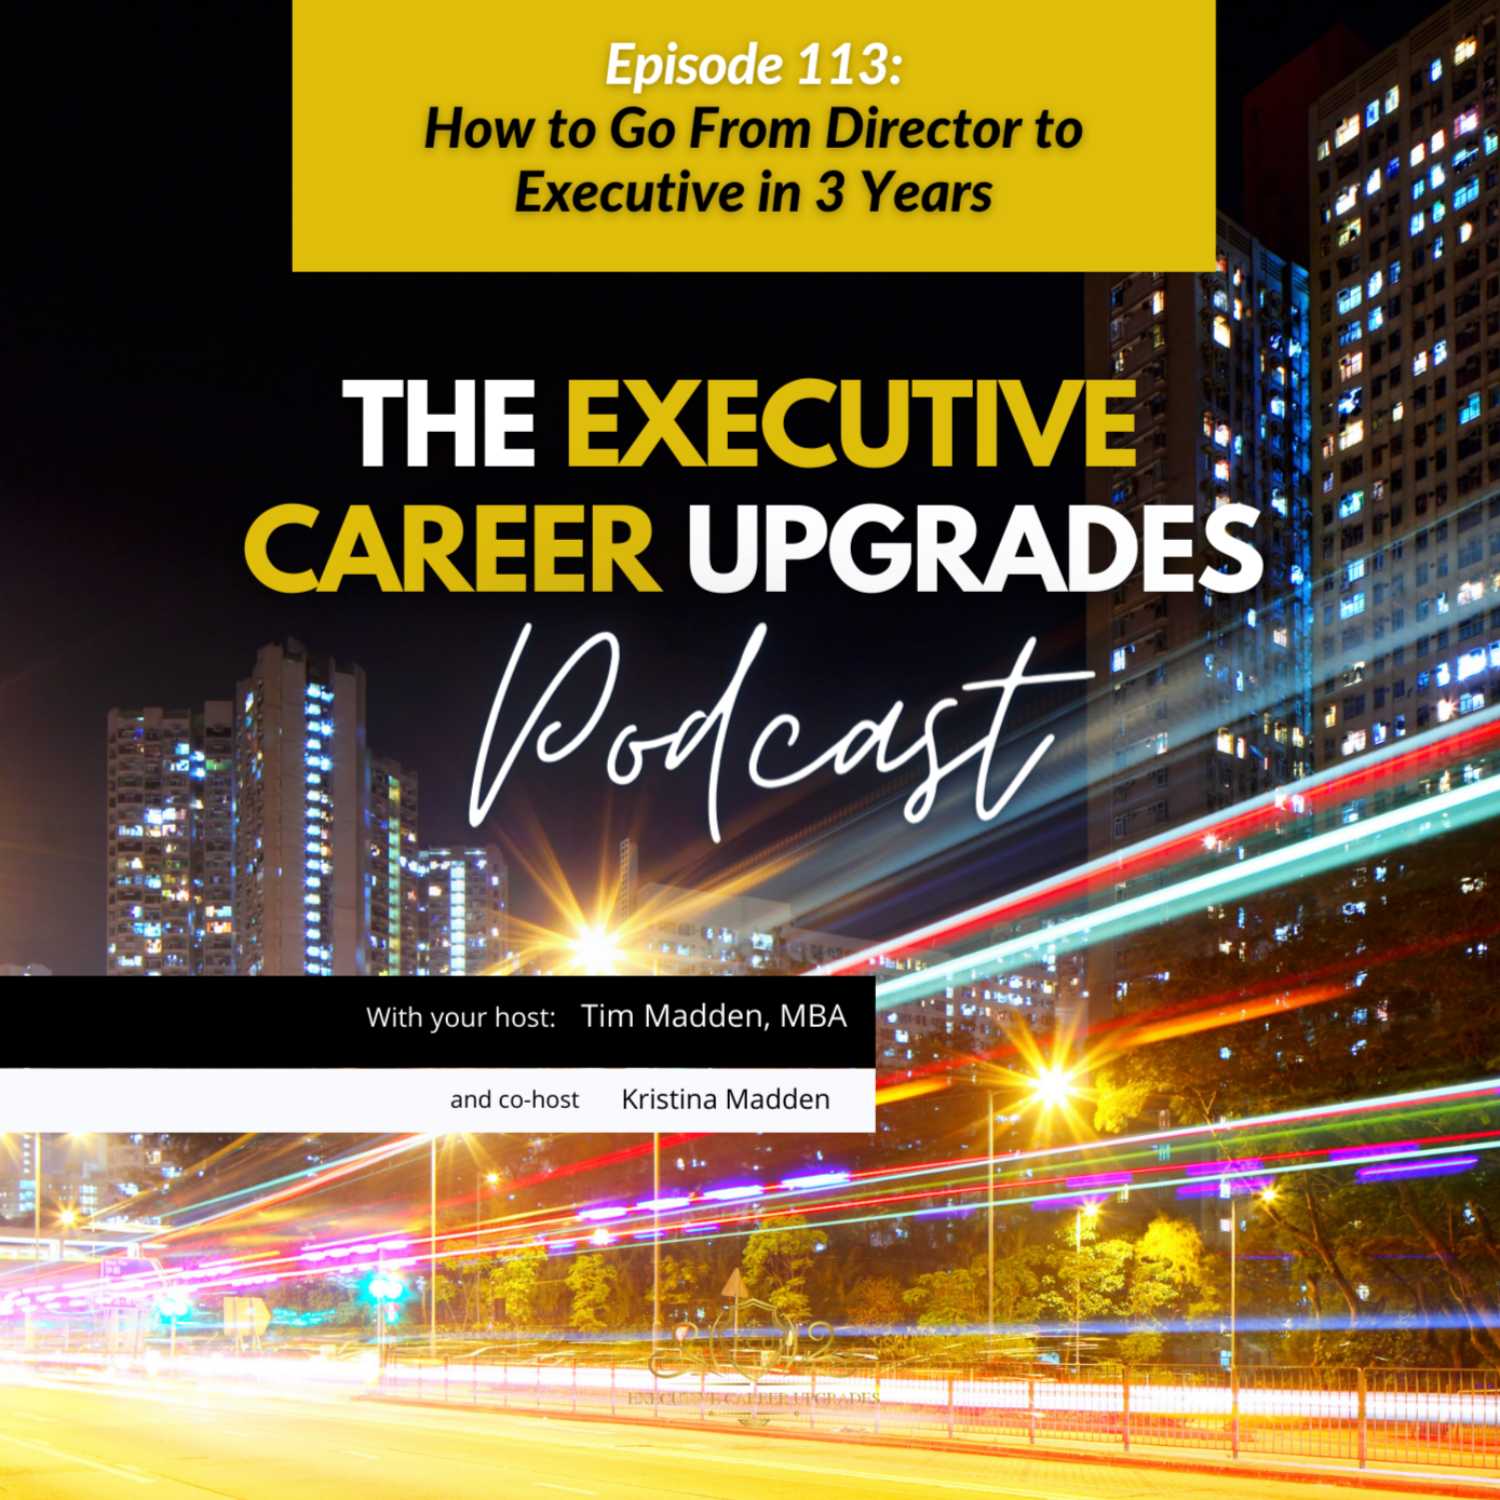 How to Go From Director to Executive in 3 Years